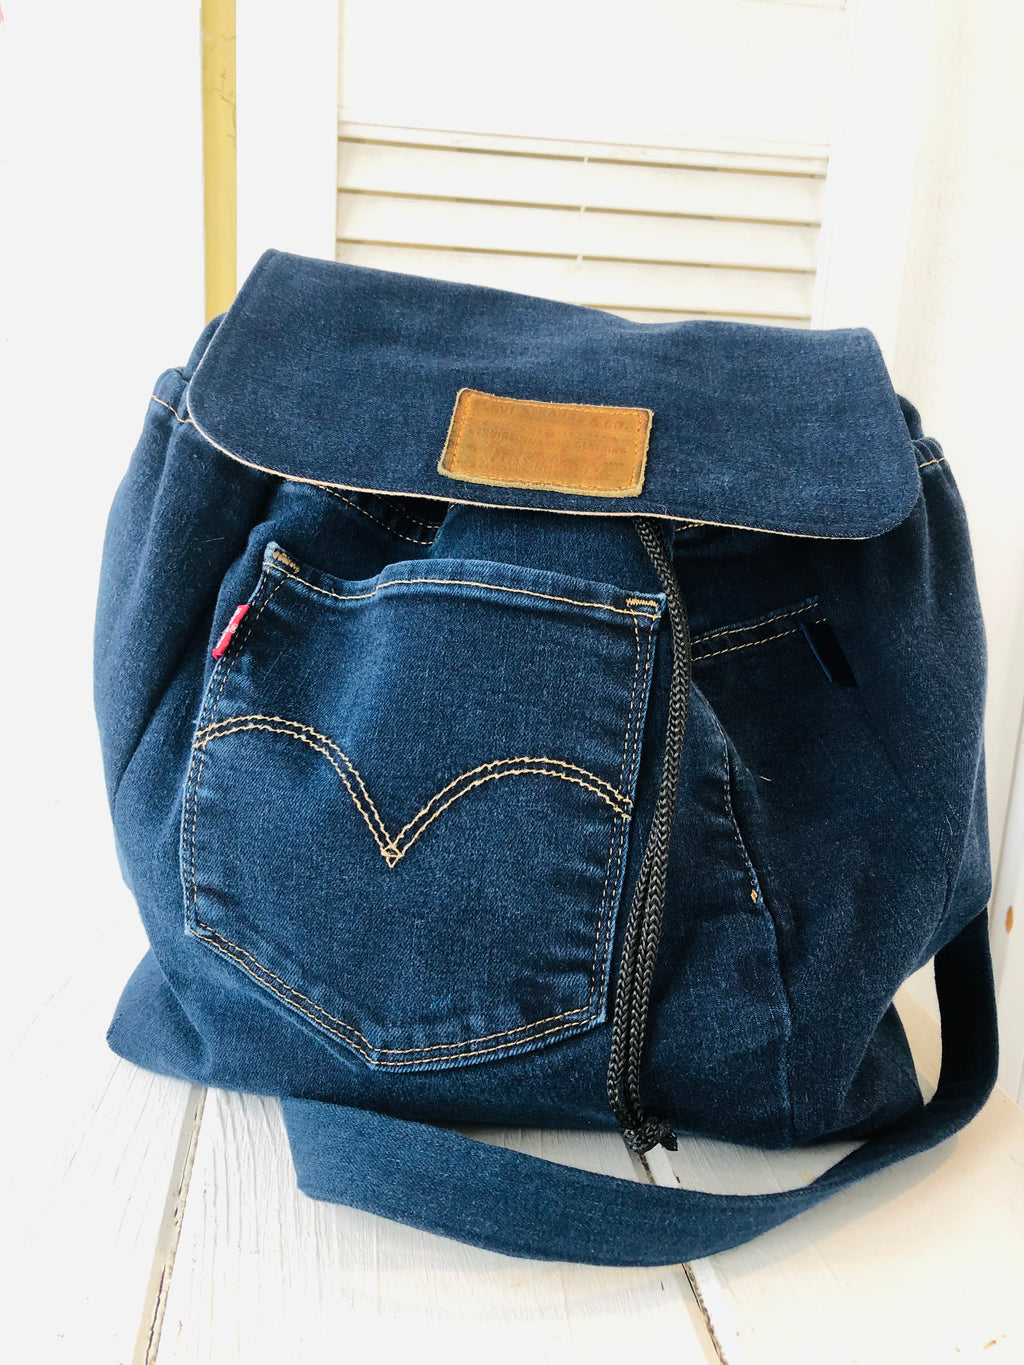 Upcycled Levi Denim Backpack by Jeans Crafter 🇨🇦